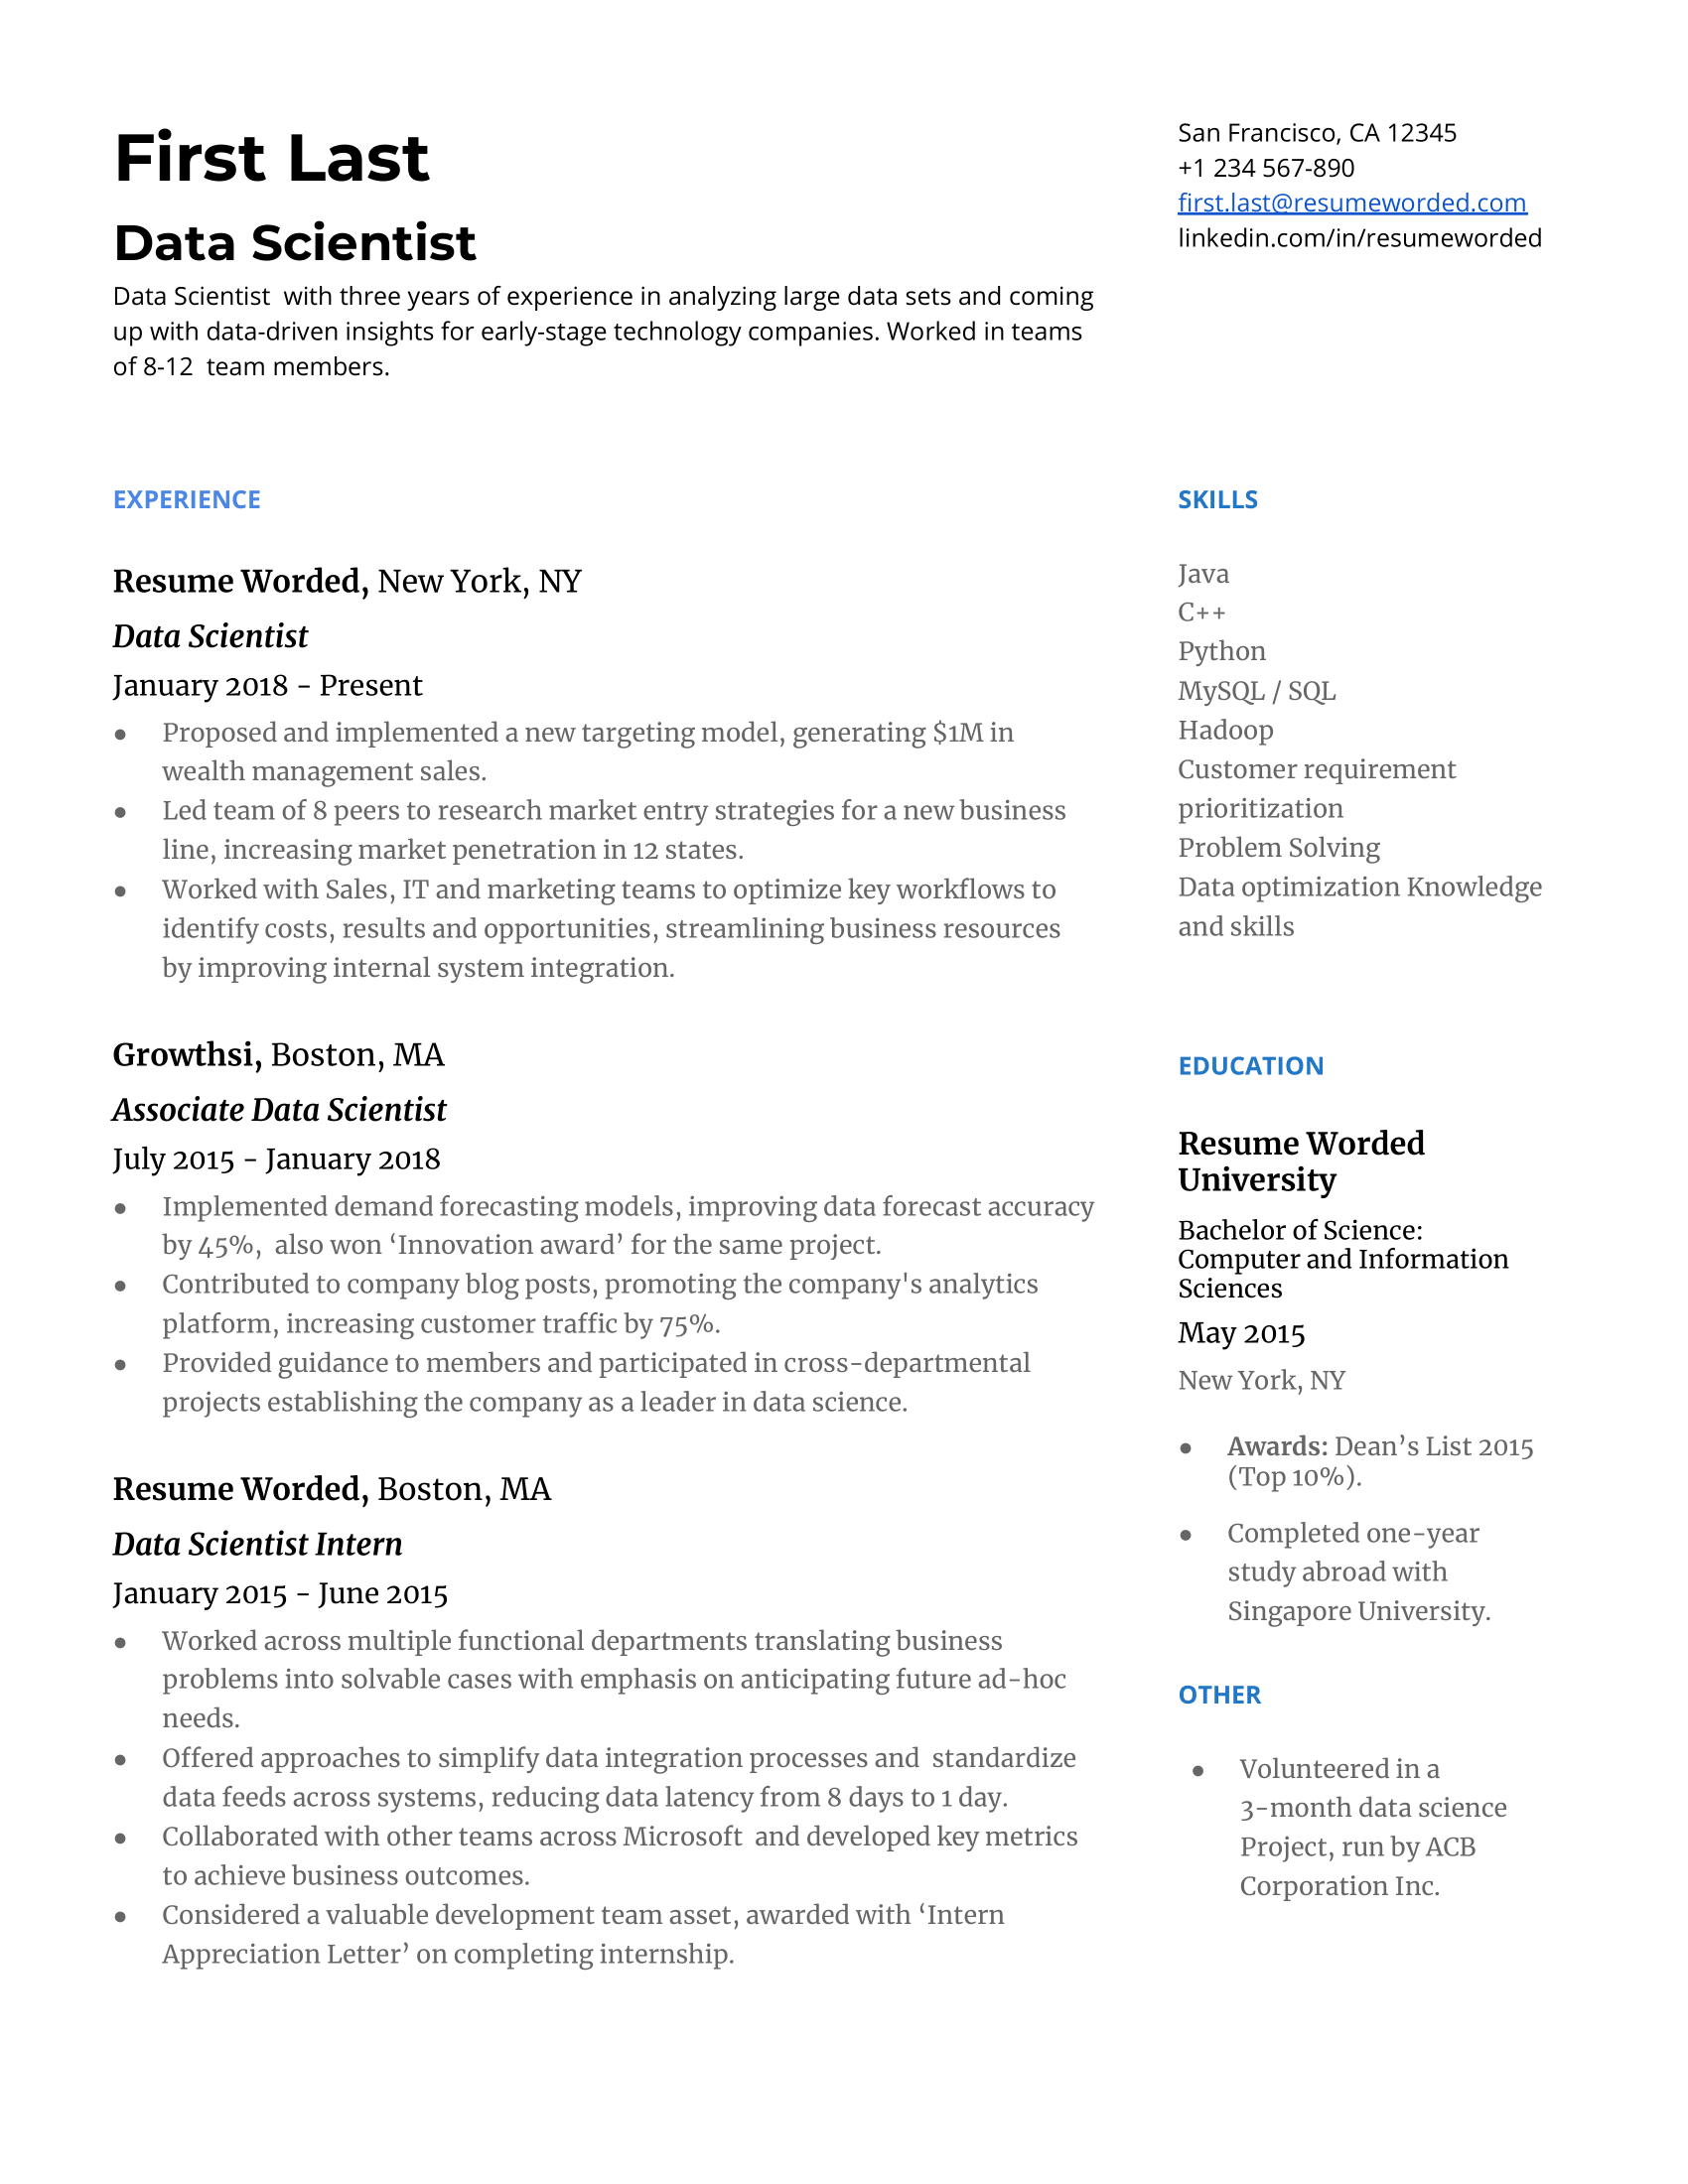 An annotated screenshot of a well-crafted data scientist's CV showcasing real-world project experience and coding proficiency.